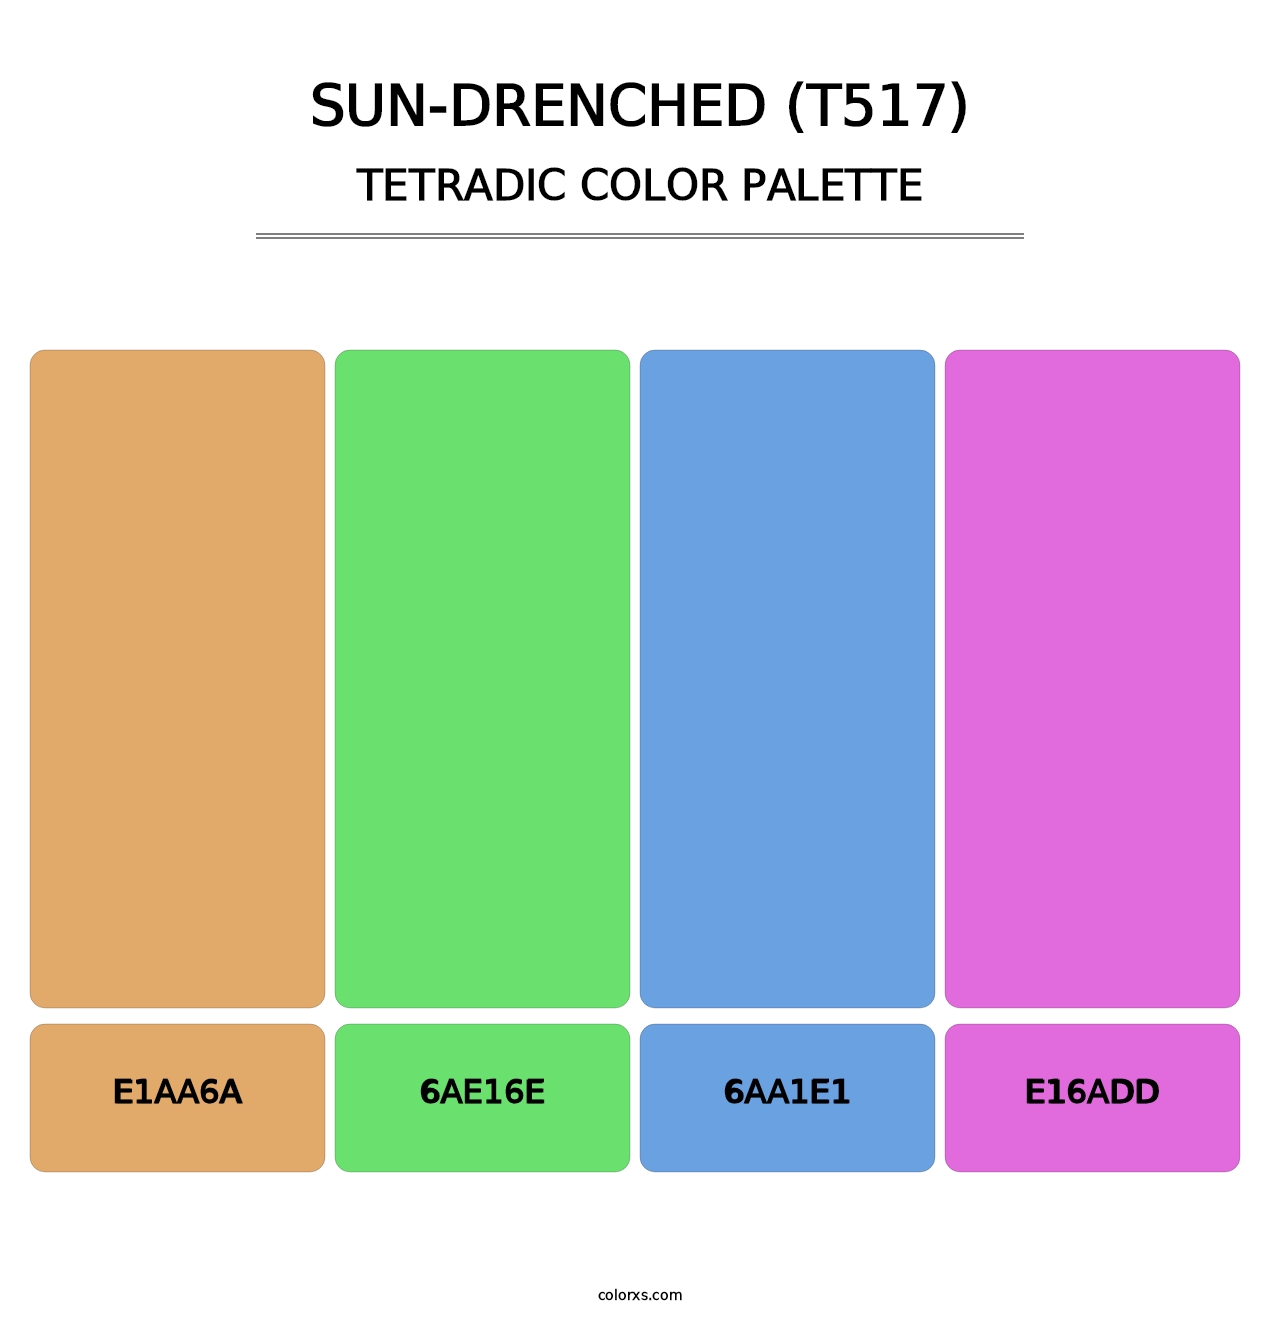 Sun-Drenched (T517) - Tetradic Color Palette